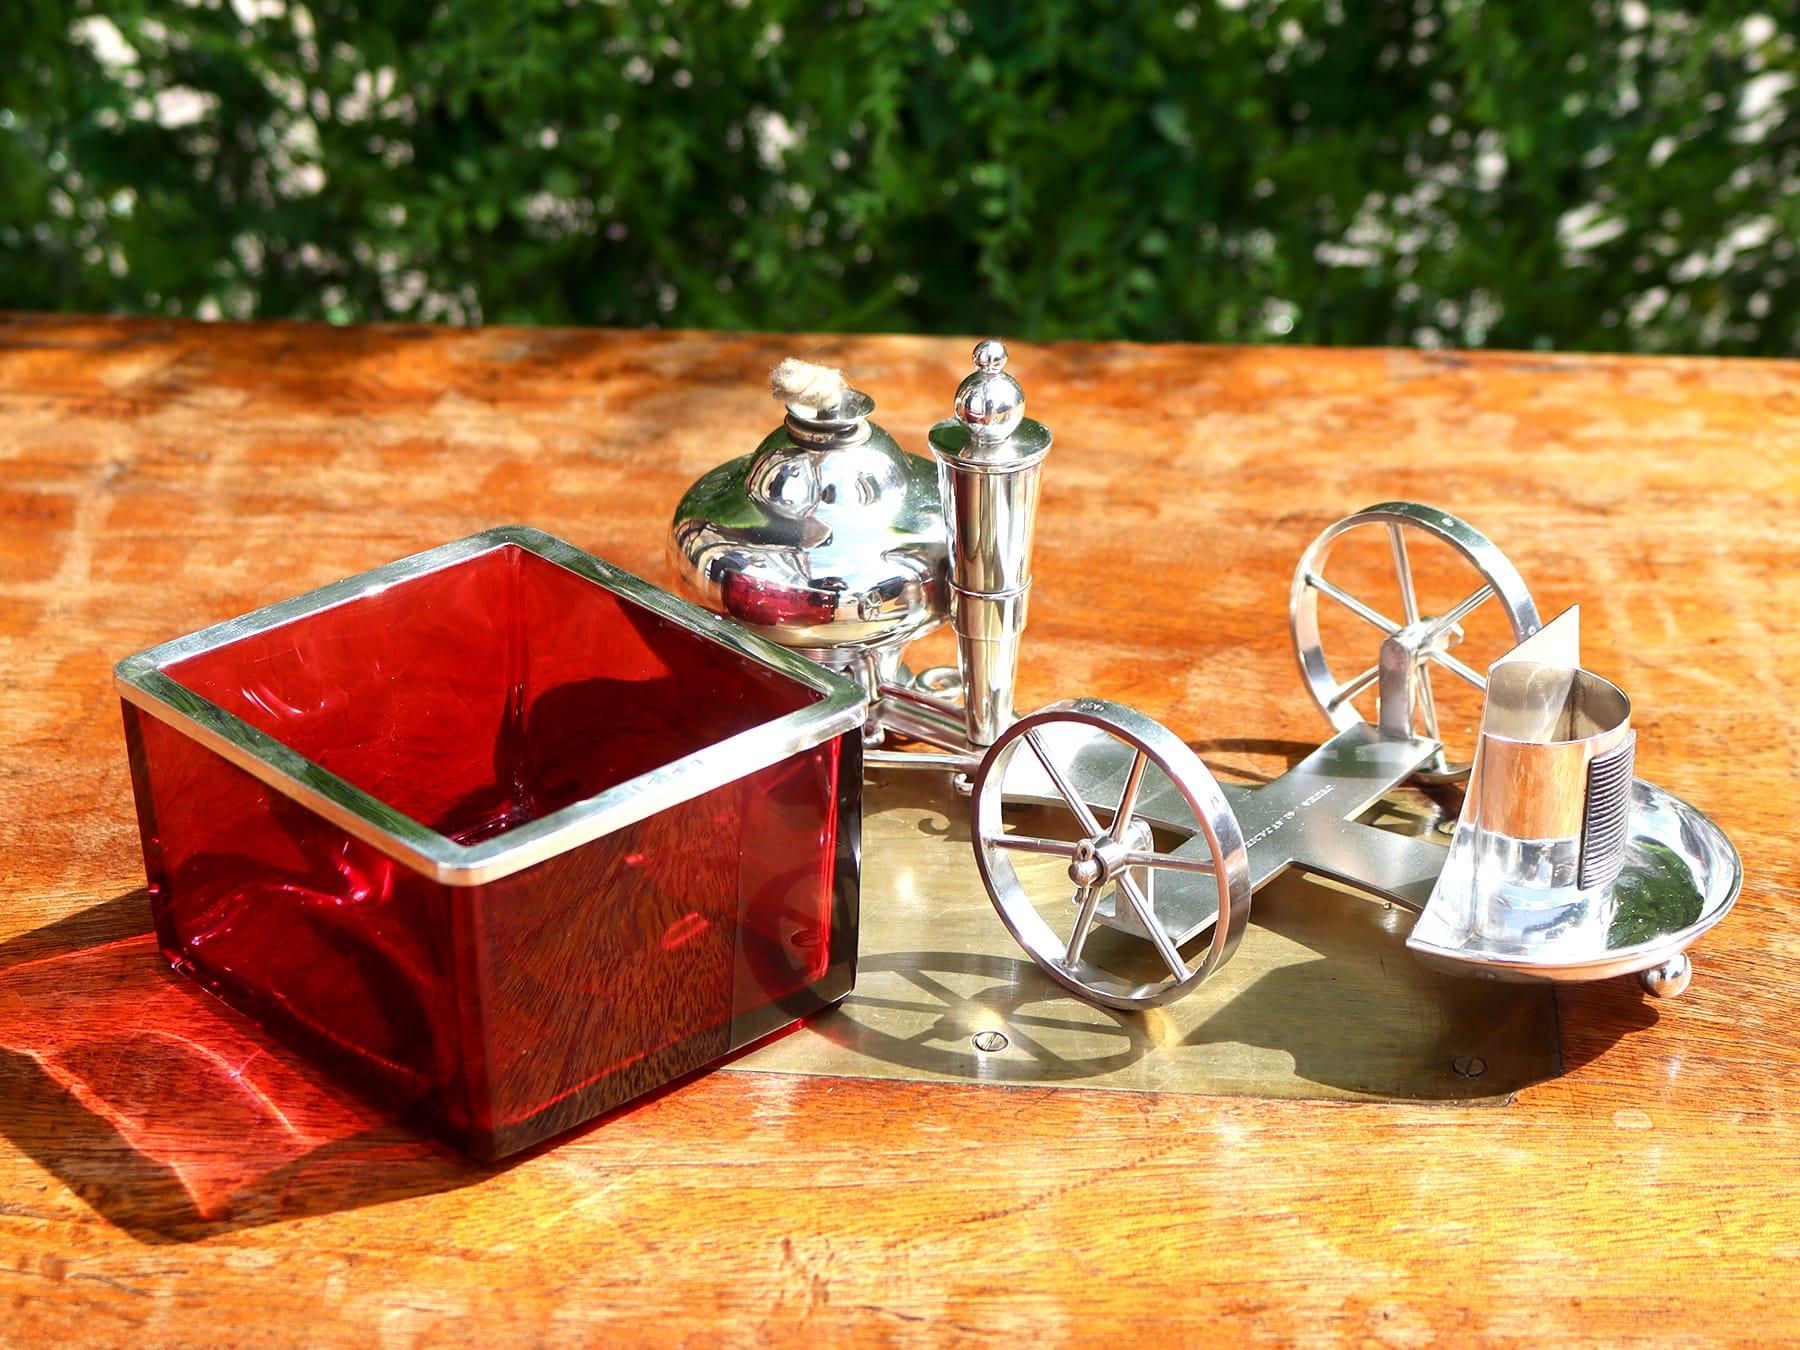 An exceptional, fine and impressive, rare antique Victorian English sterling silver and cranberry glass smoking compendium carriage; an addition to our ornamental silverware collection

This exceptional, fine and impressive, unusual antique